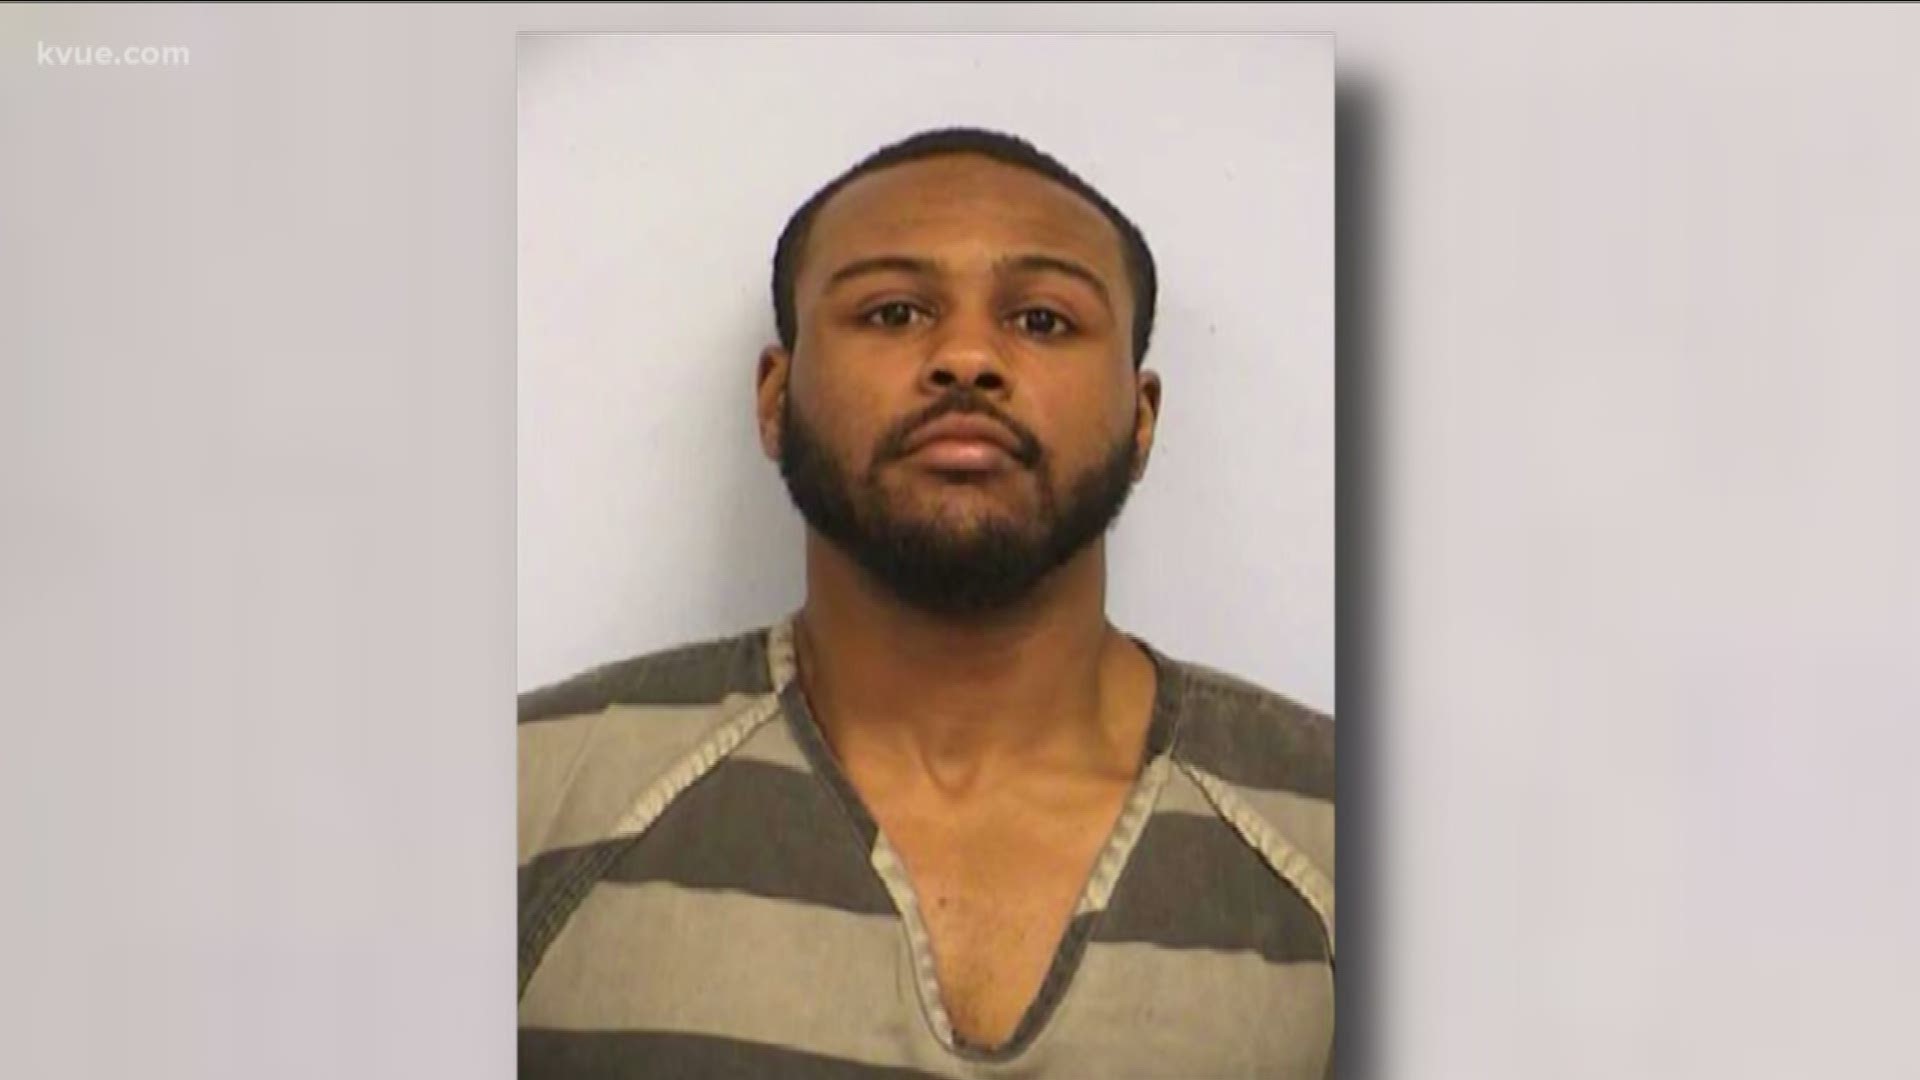 The man accused of killing a UT student will step into a Travis County courtroom this week.